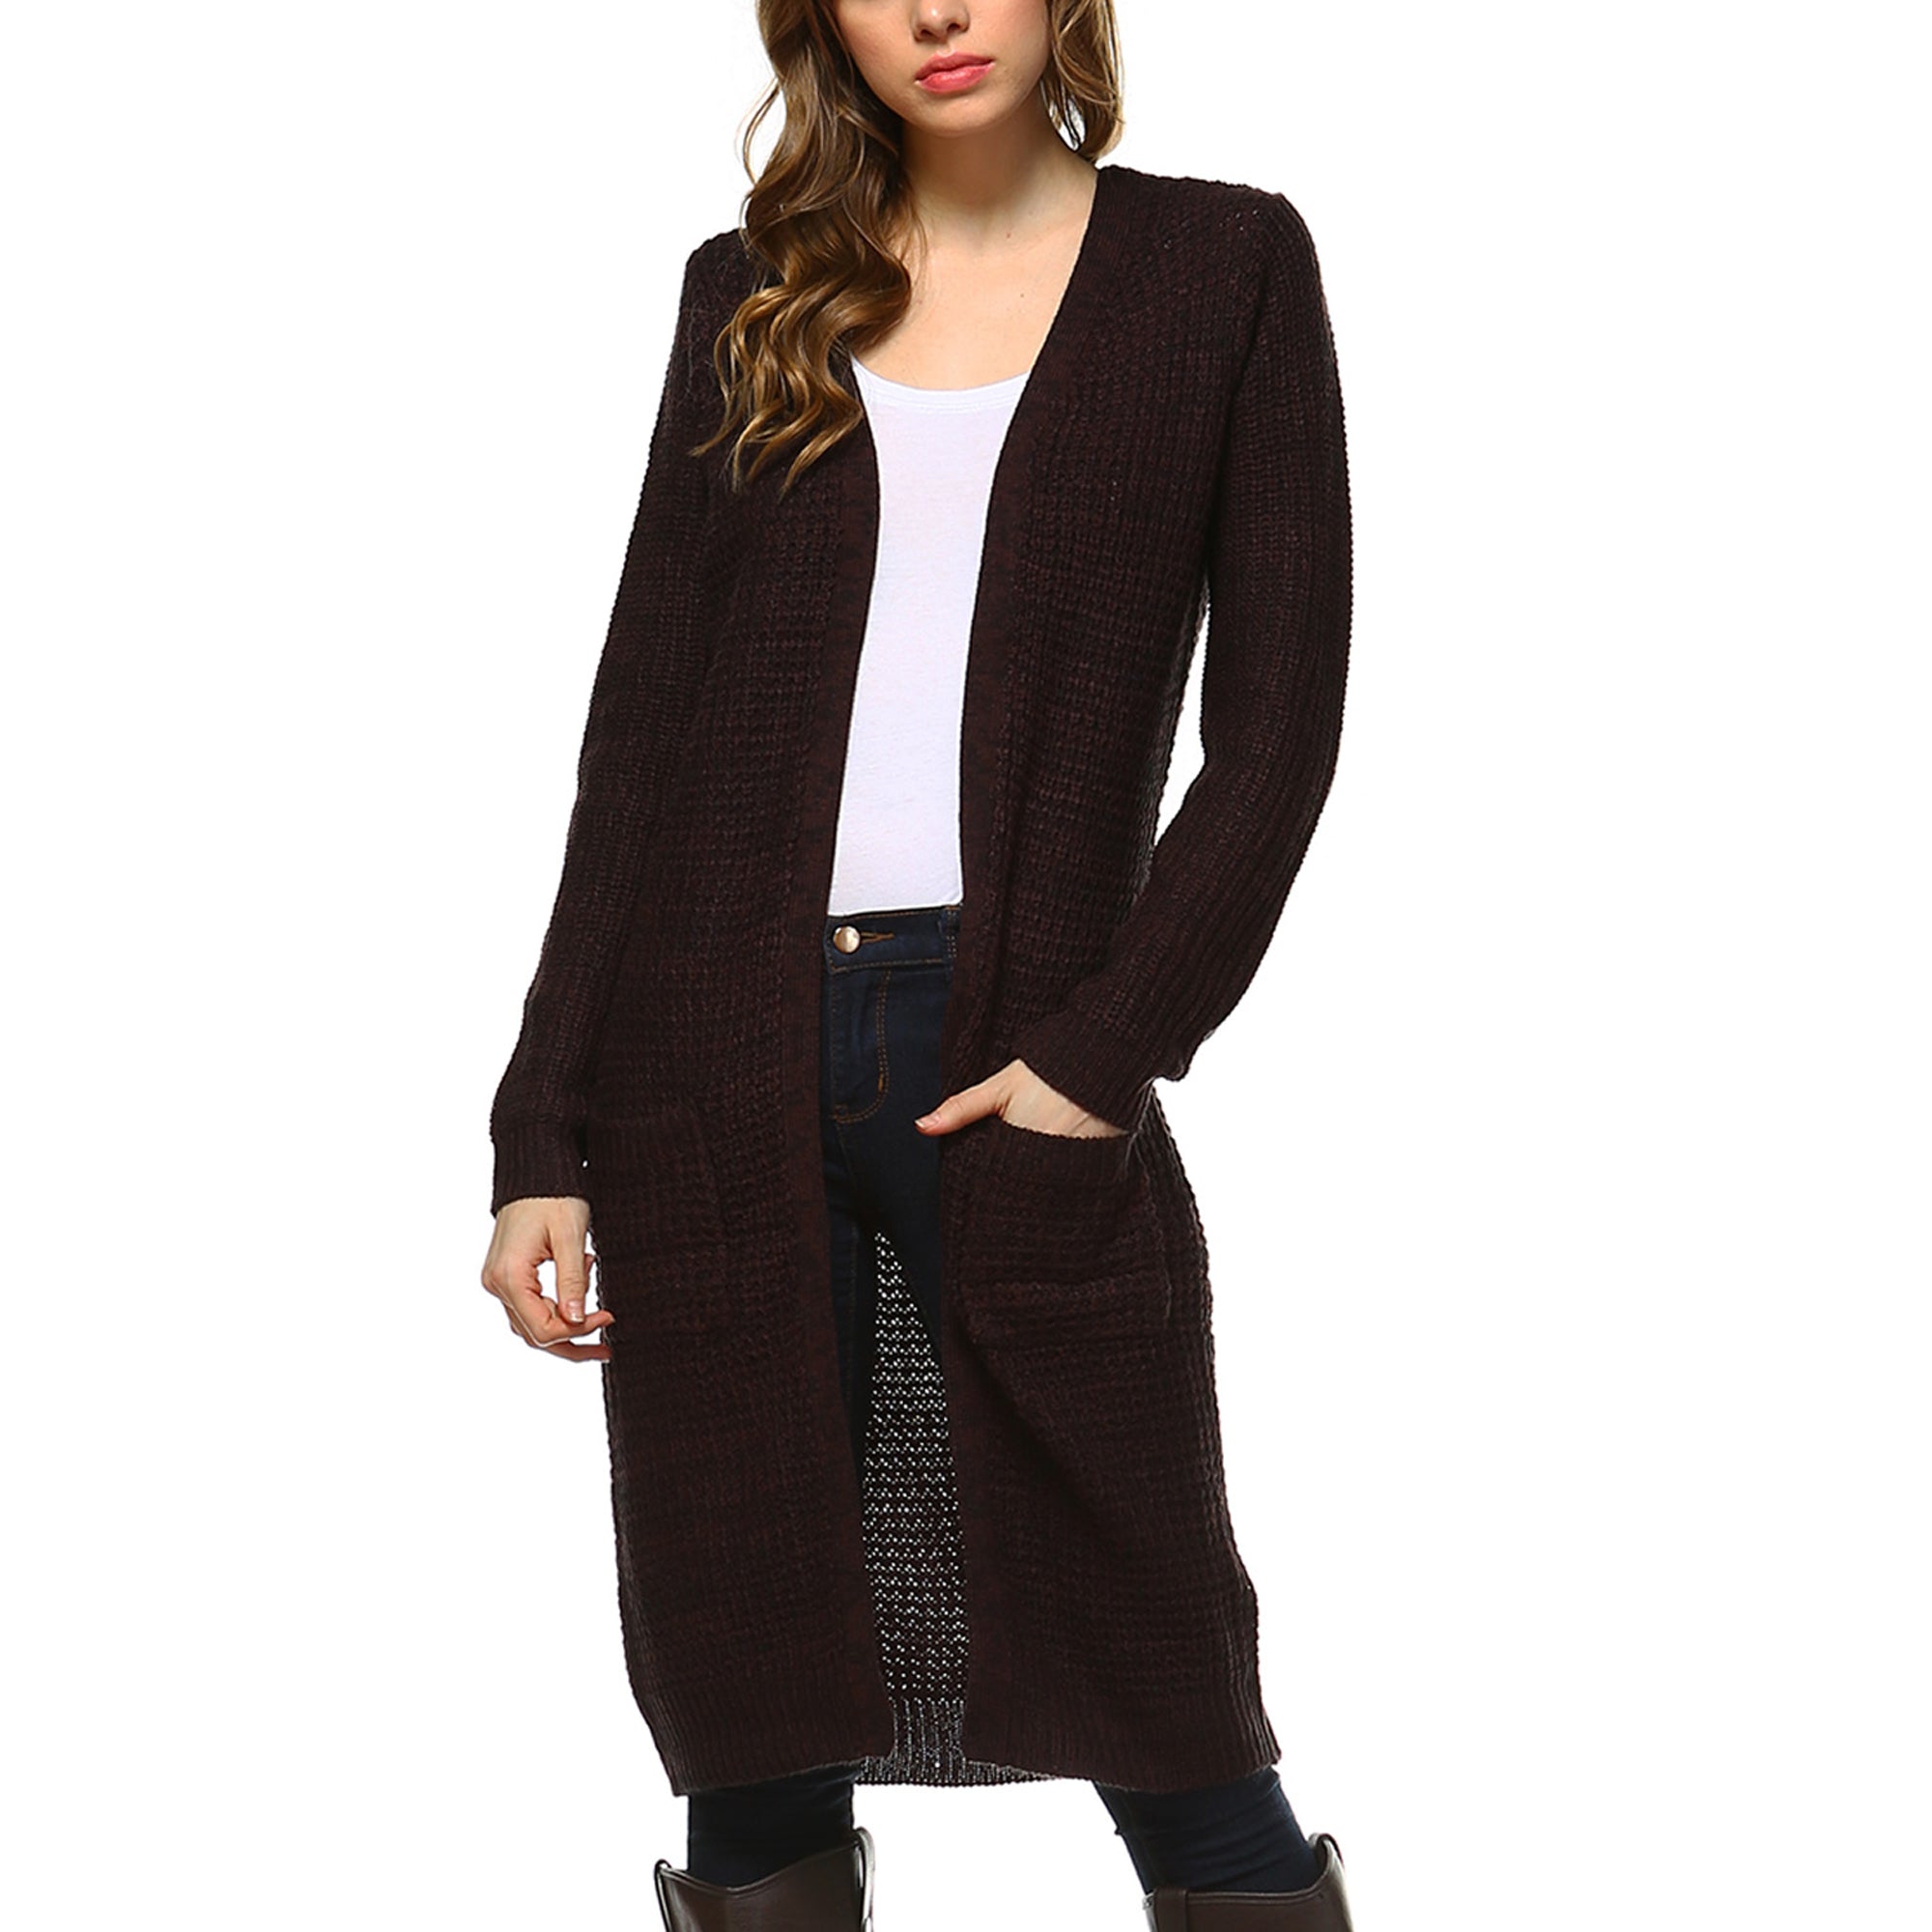 Fashionazzle Women's Casual Open Front Knit Sweater Long Cardigan with Pocket